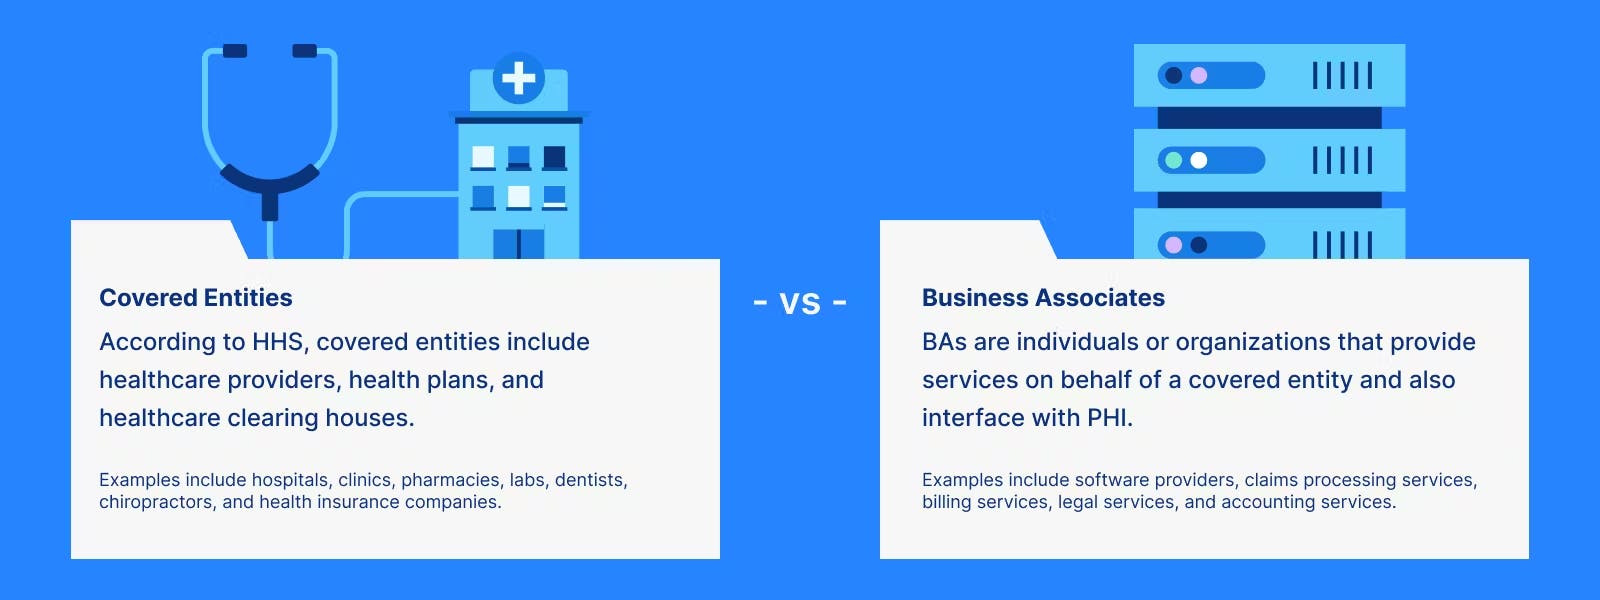 Definition of HIPAA covered entities vs business associates